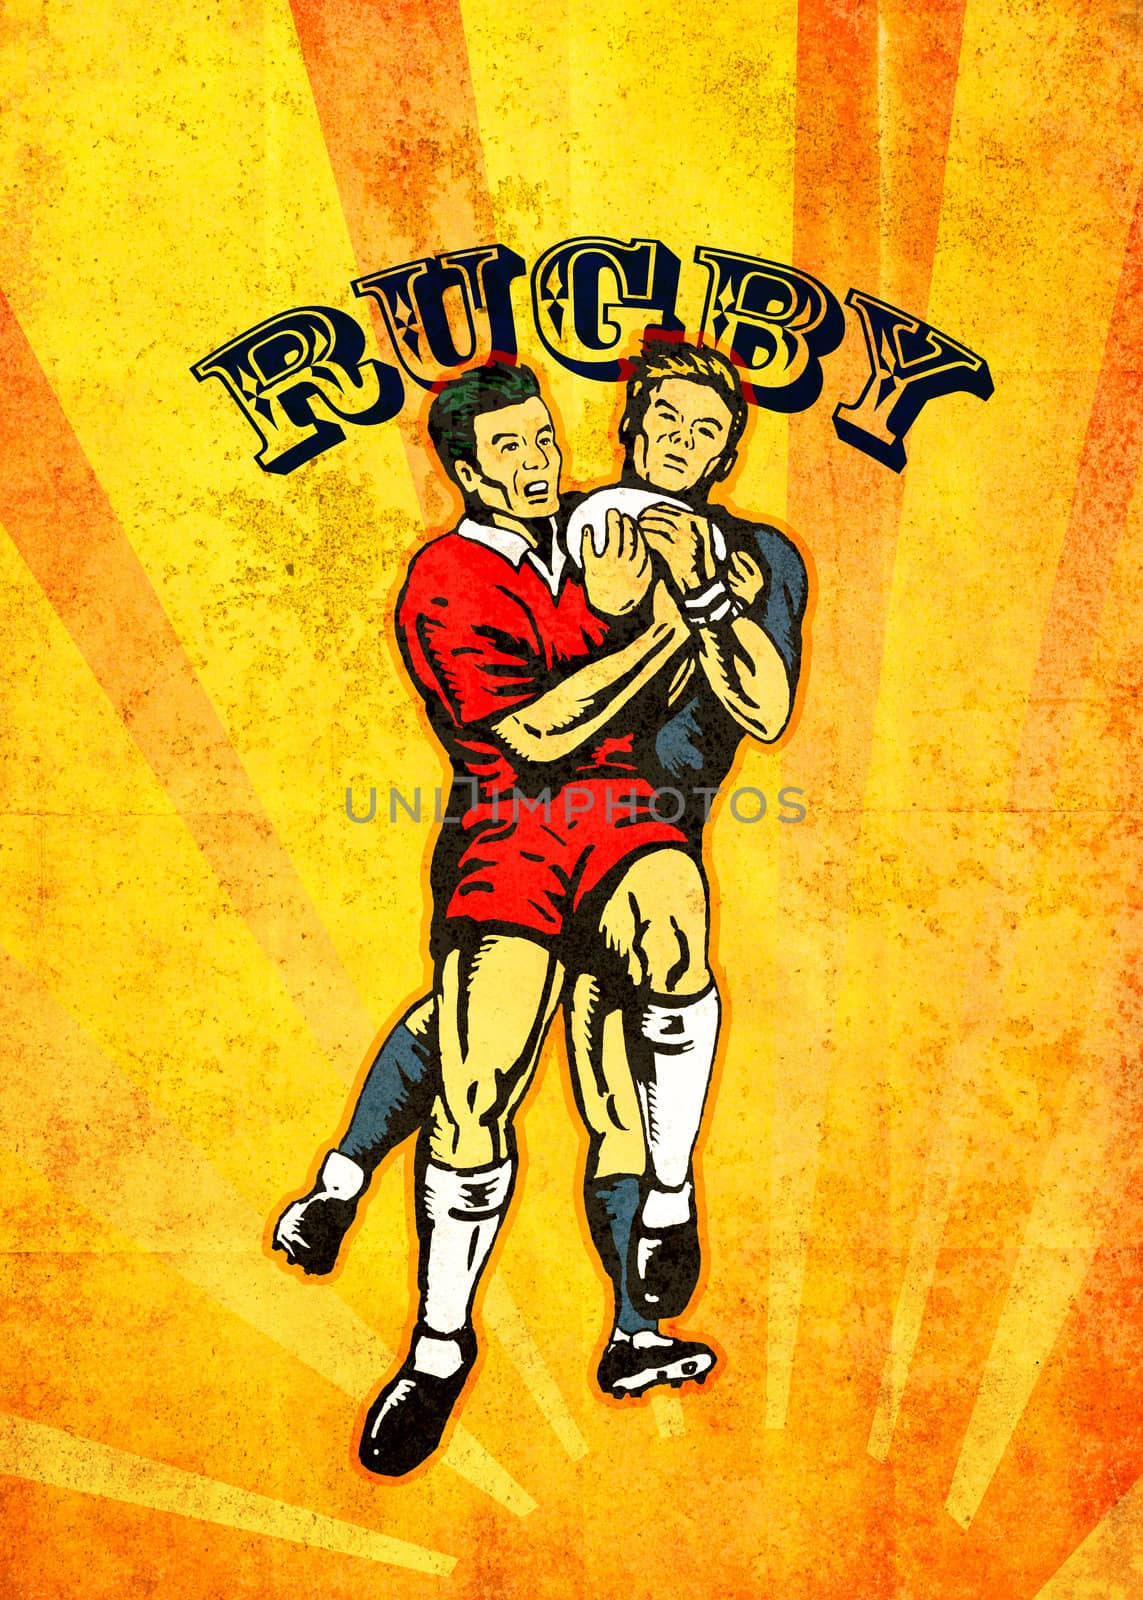 poster illustration of rugby players jumping catching ball with sunburst and grunge texture background with word rugby